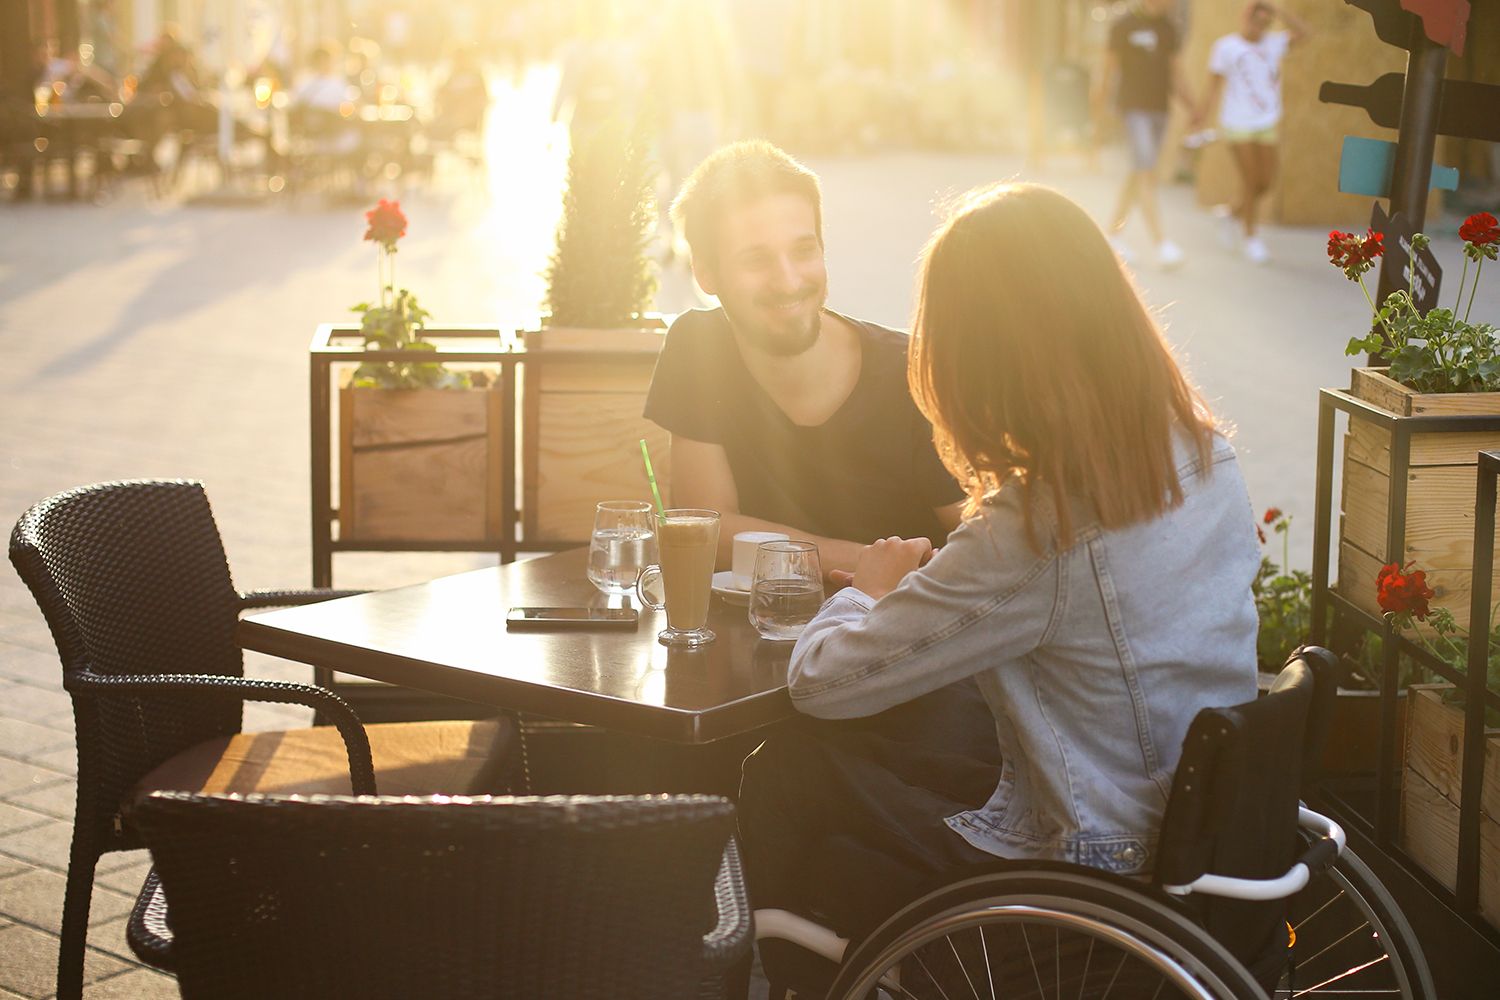 Women with special abilities sitting on a wheel chair while enjoying outside in a café with man and having coffee